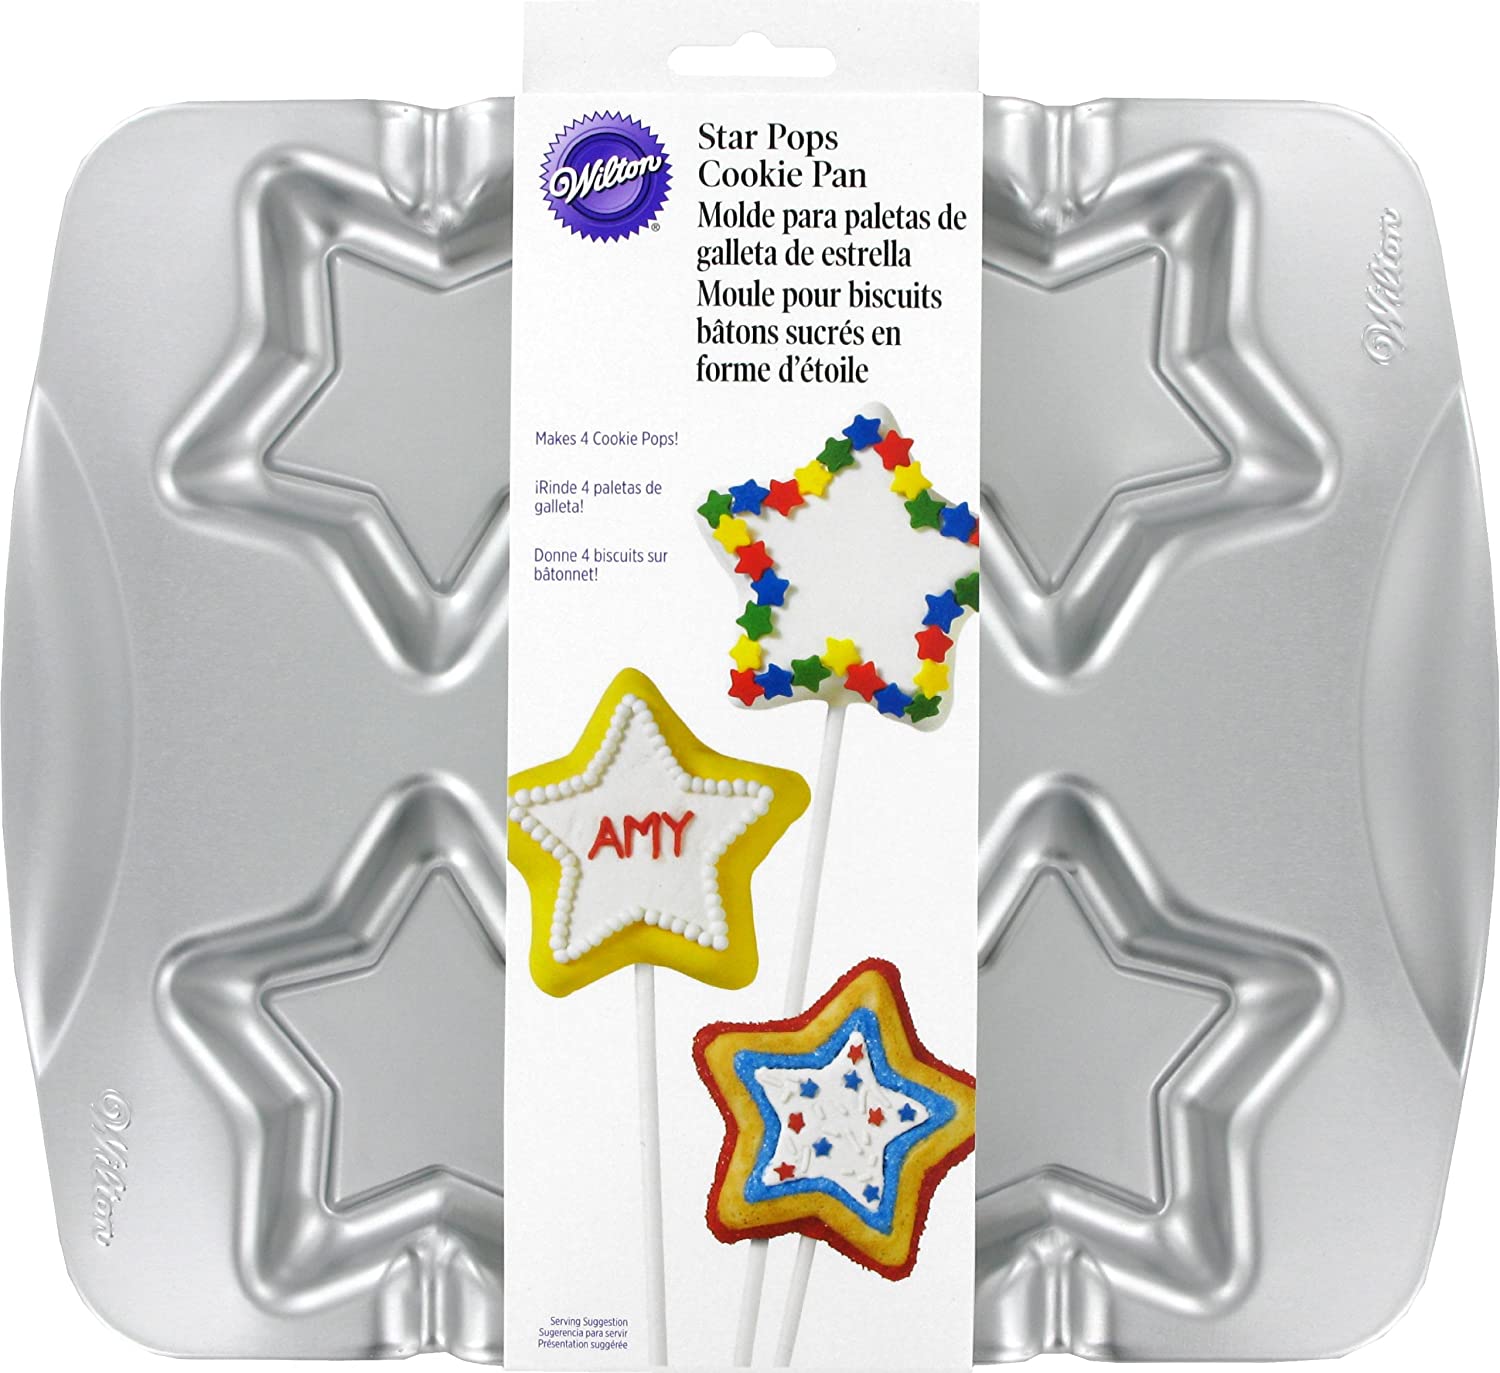 Wilton Star Pops Cookie Cakesicle Baking Pan - Kate's Cupboard